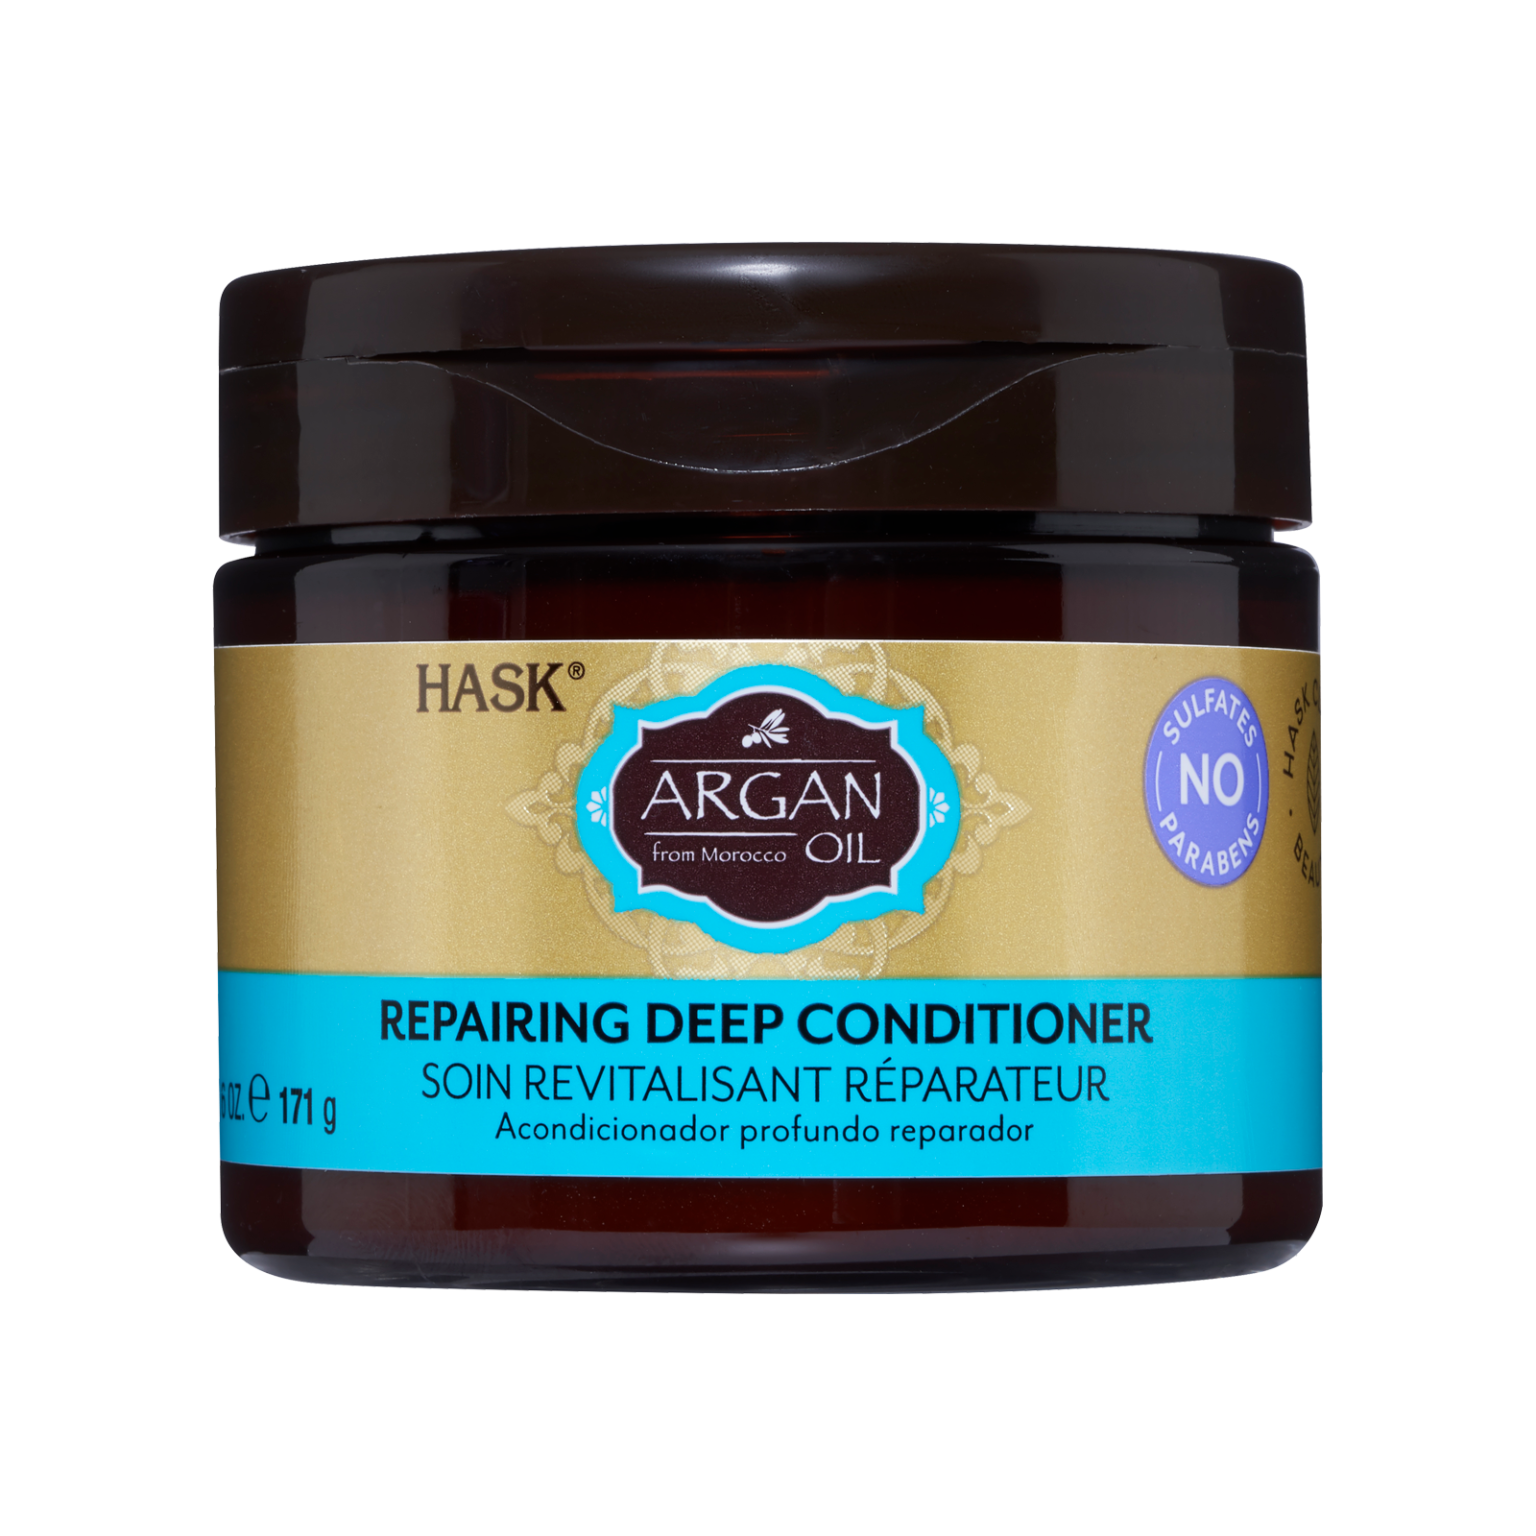 HASK ARGAN OIL Repairing Deep Conditioner Treatments for all hair types, color safe, gluten free, sulfate free, paraben free - Pack of 2 Jars Orange 6 Ounce (Pack of 2)